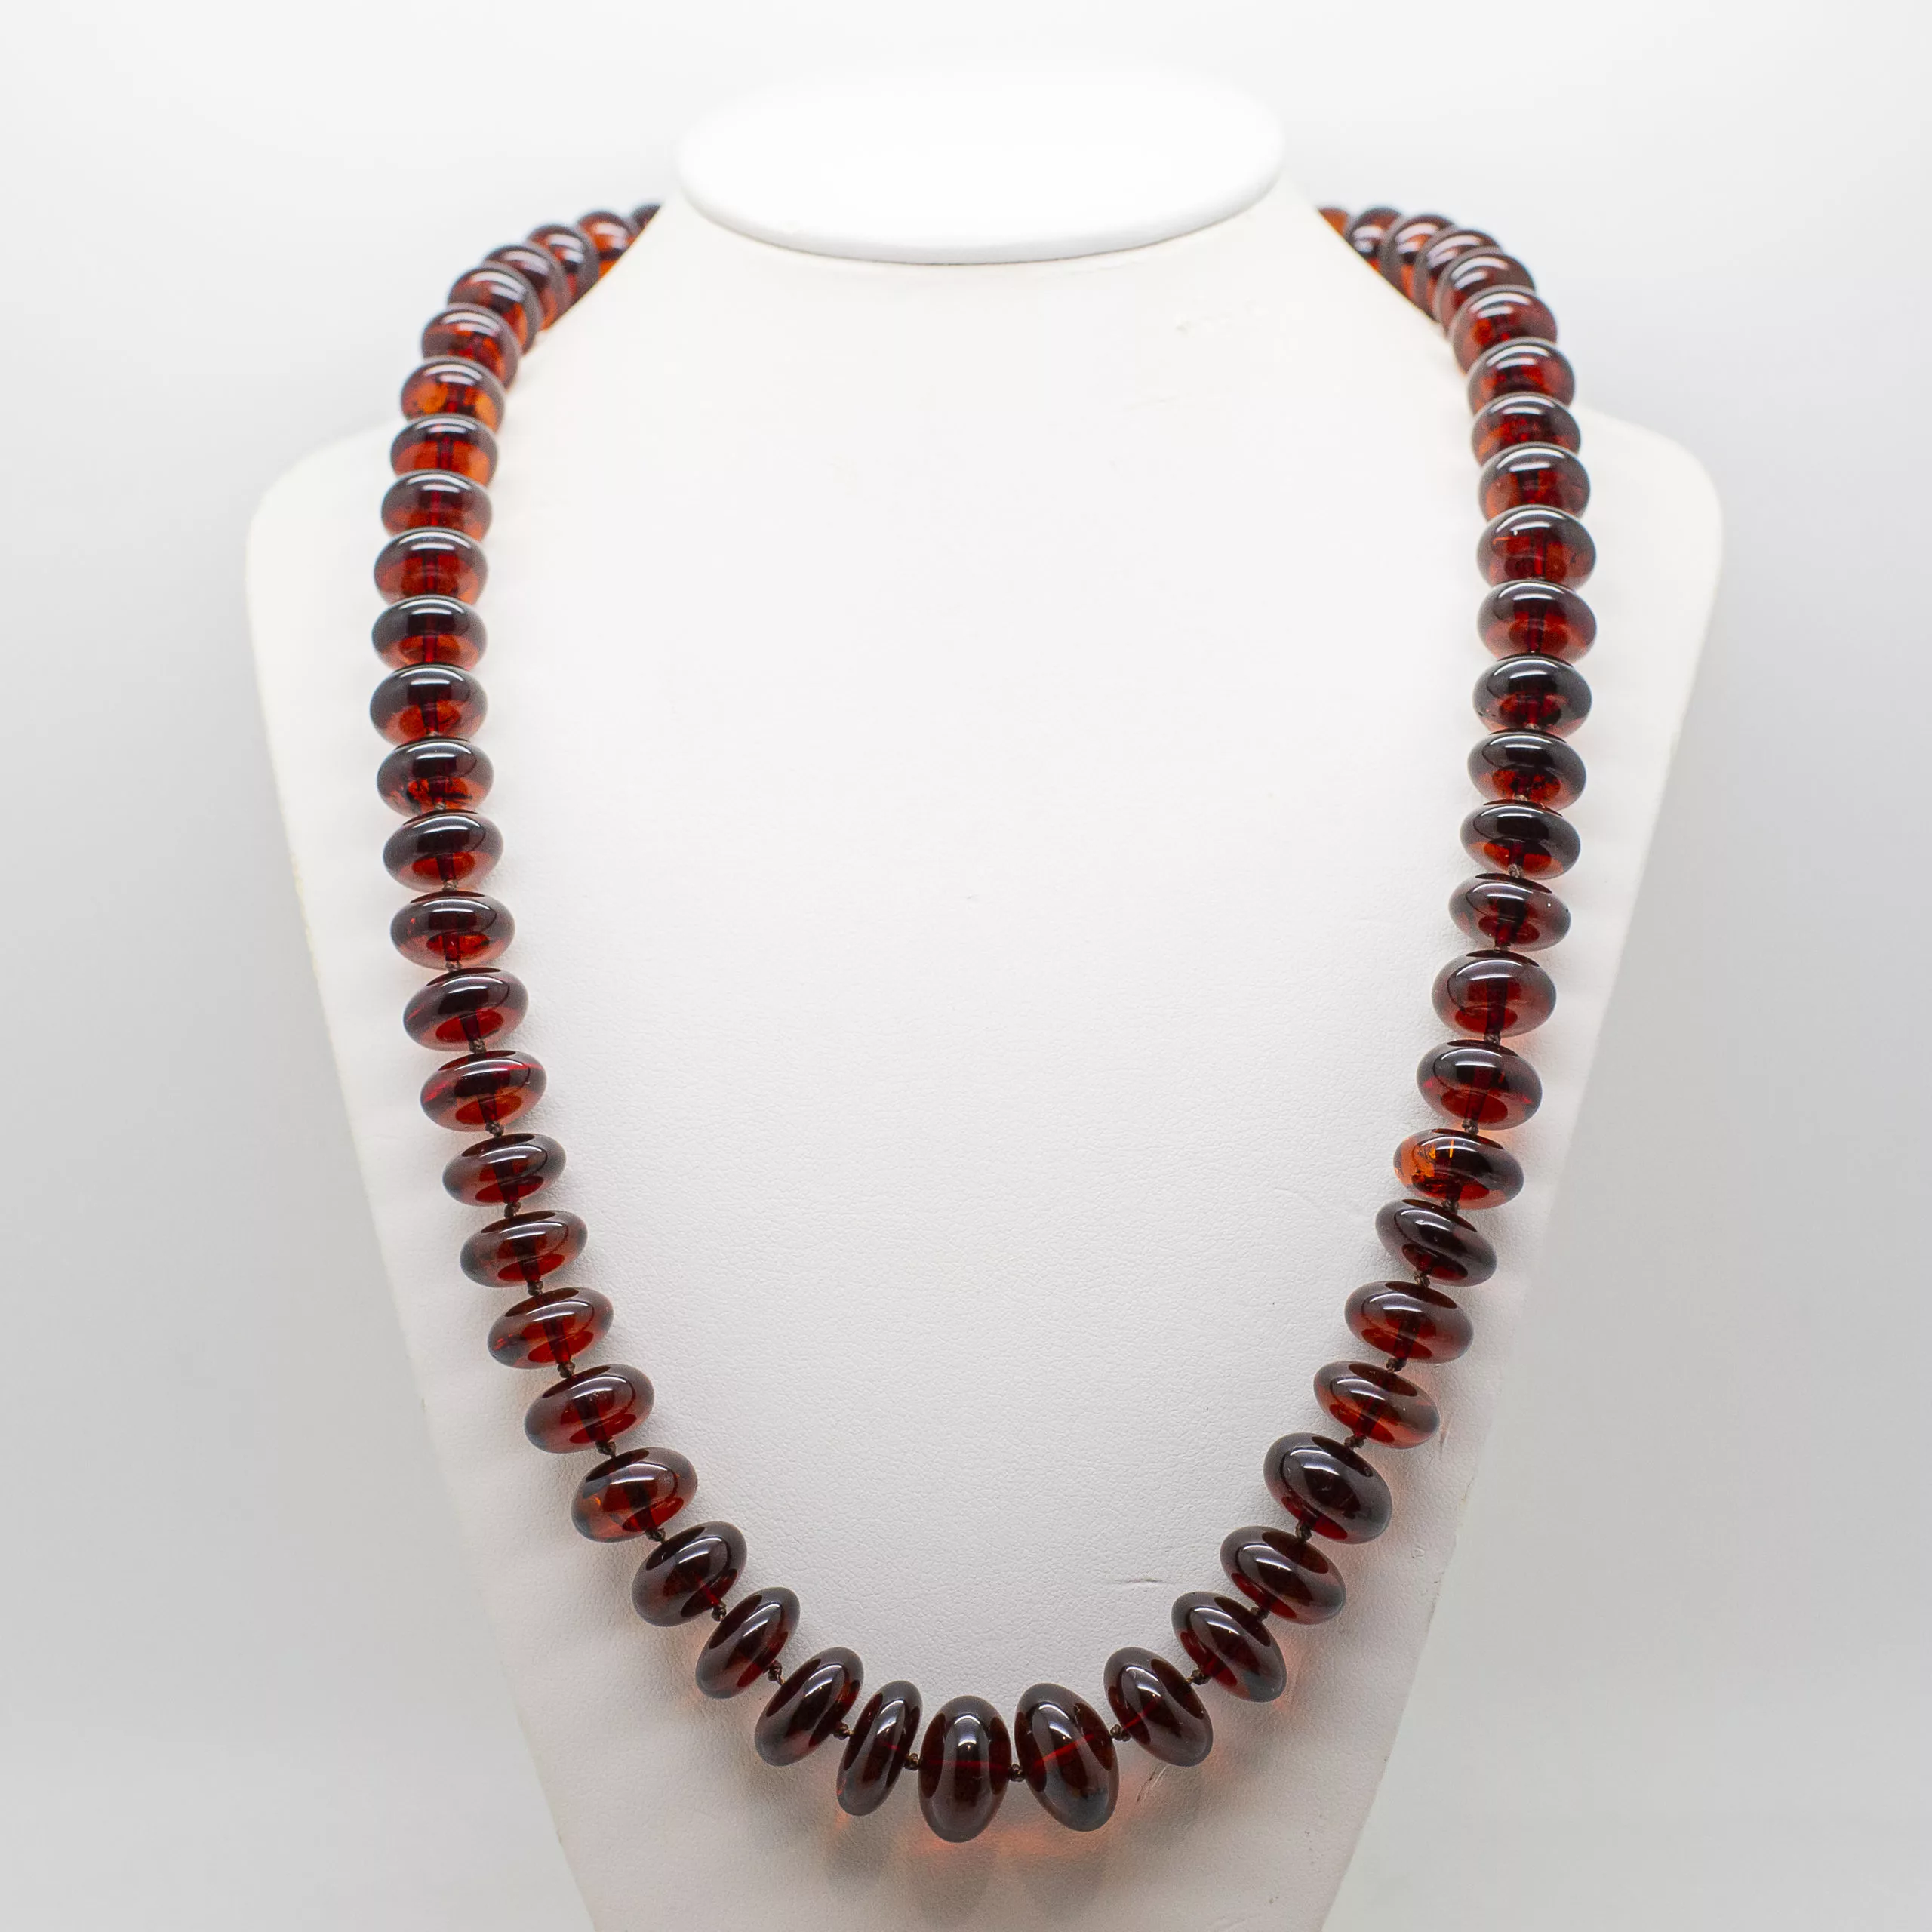 Childrens Baltic Amber Necklace Made of Cherry Baltic Amber Beads.